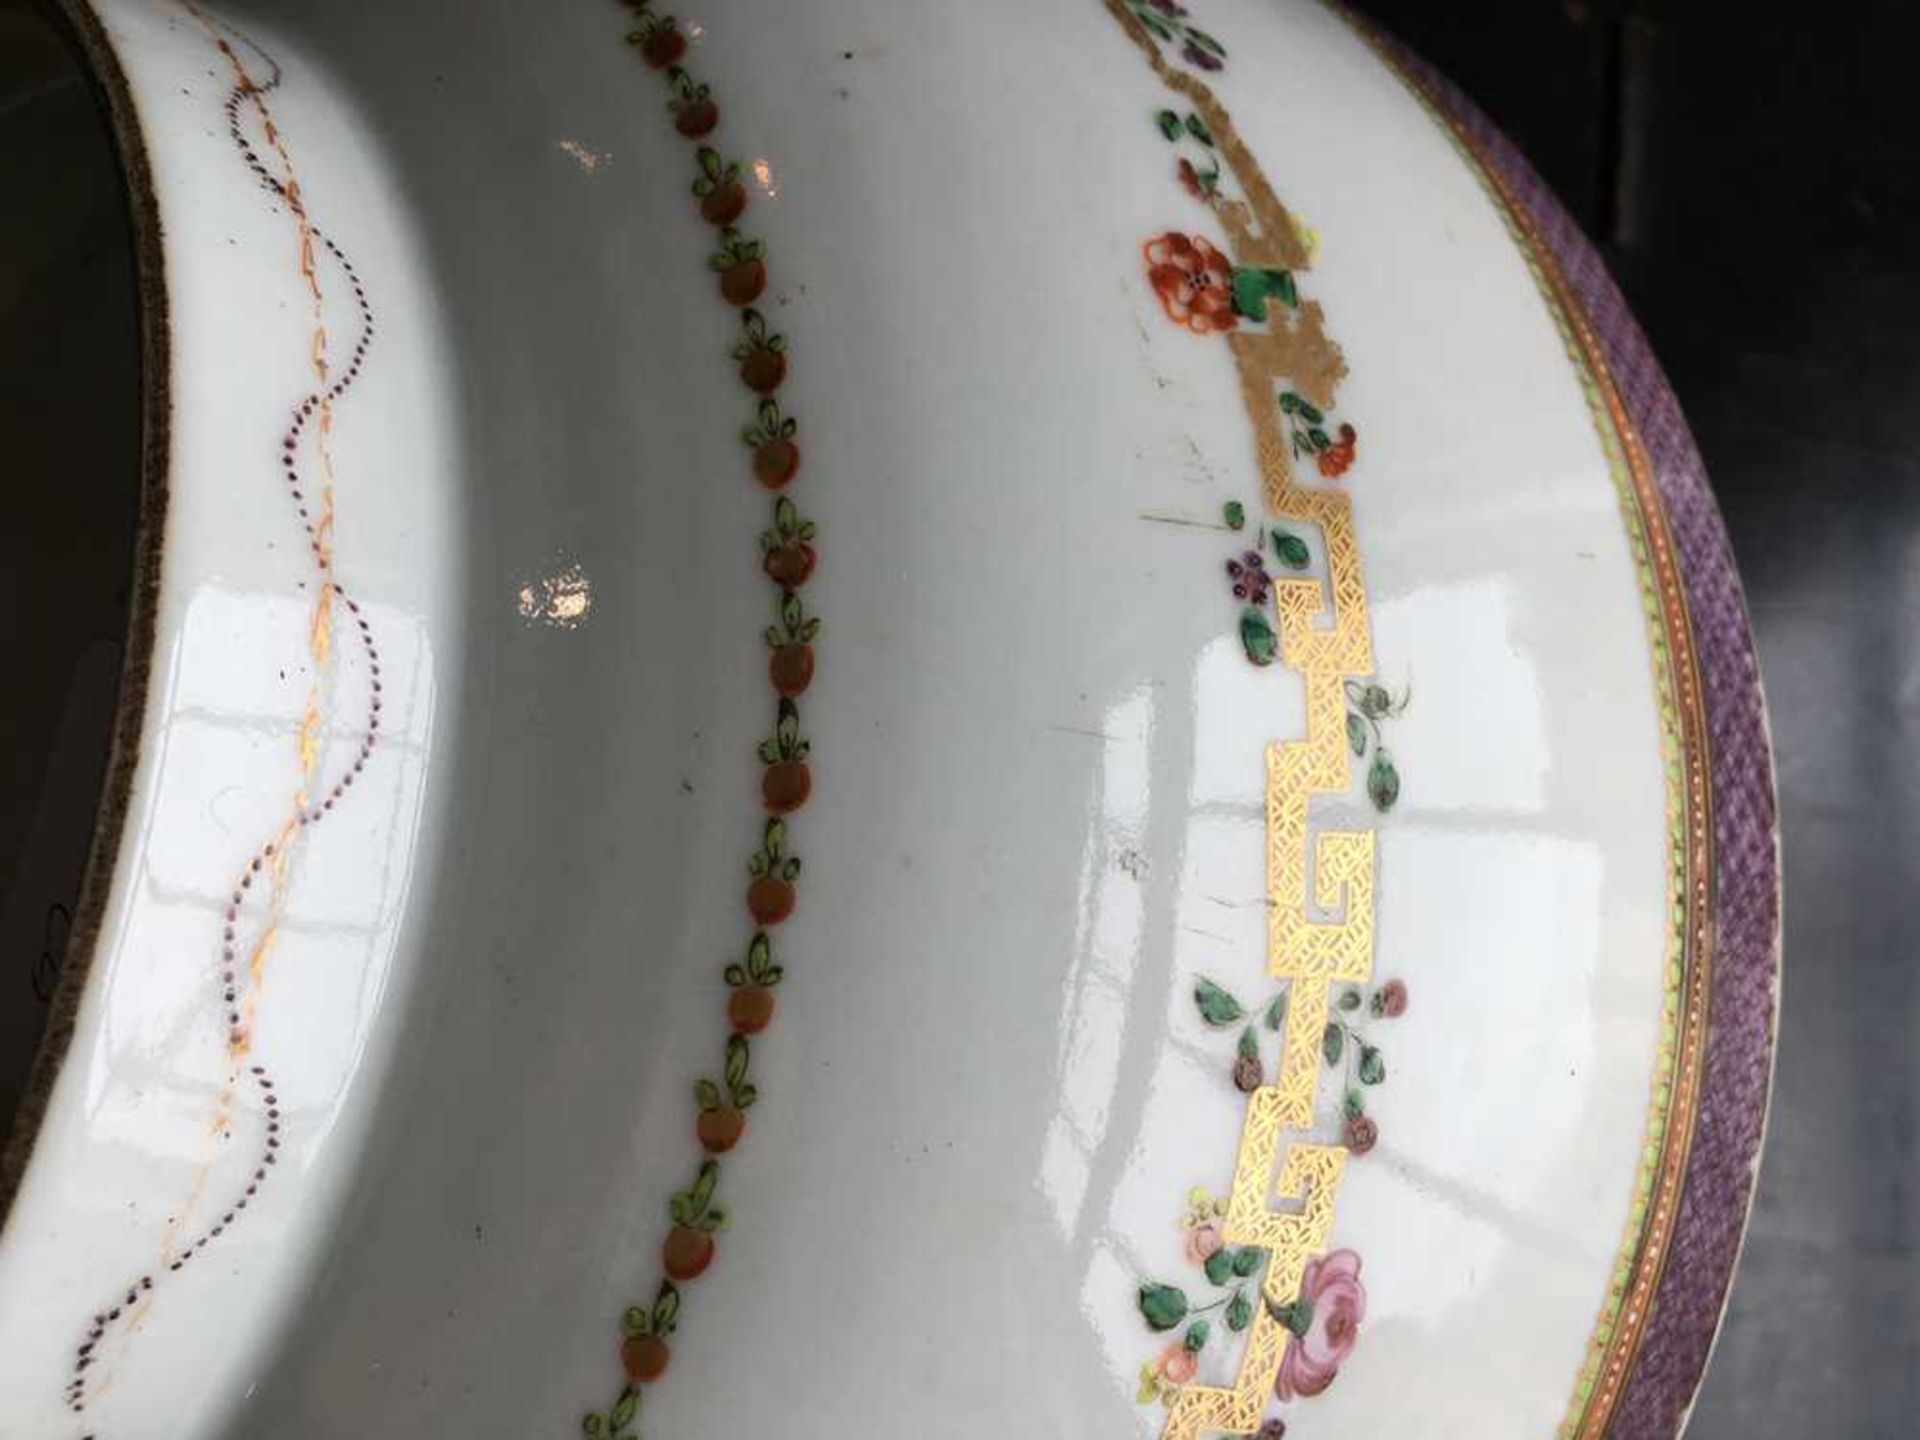 TWO CHINESE EXPORT PORCELAIN PUNCH BOWLS QING DYNASTY, LATE 18TH/19TH CENTURY - Image 32 of 33